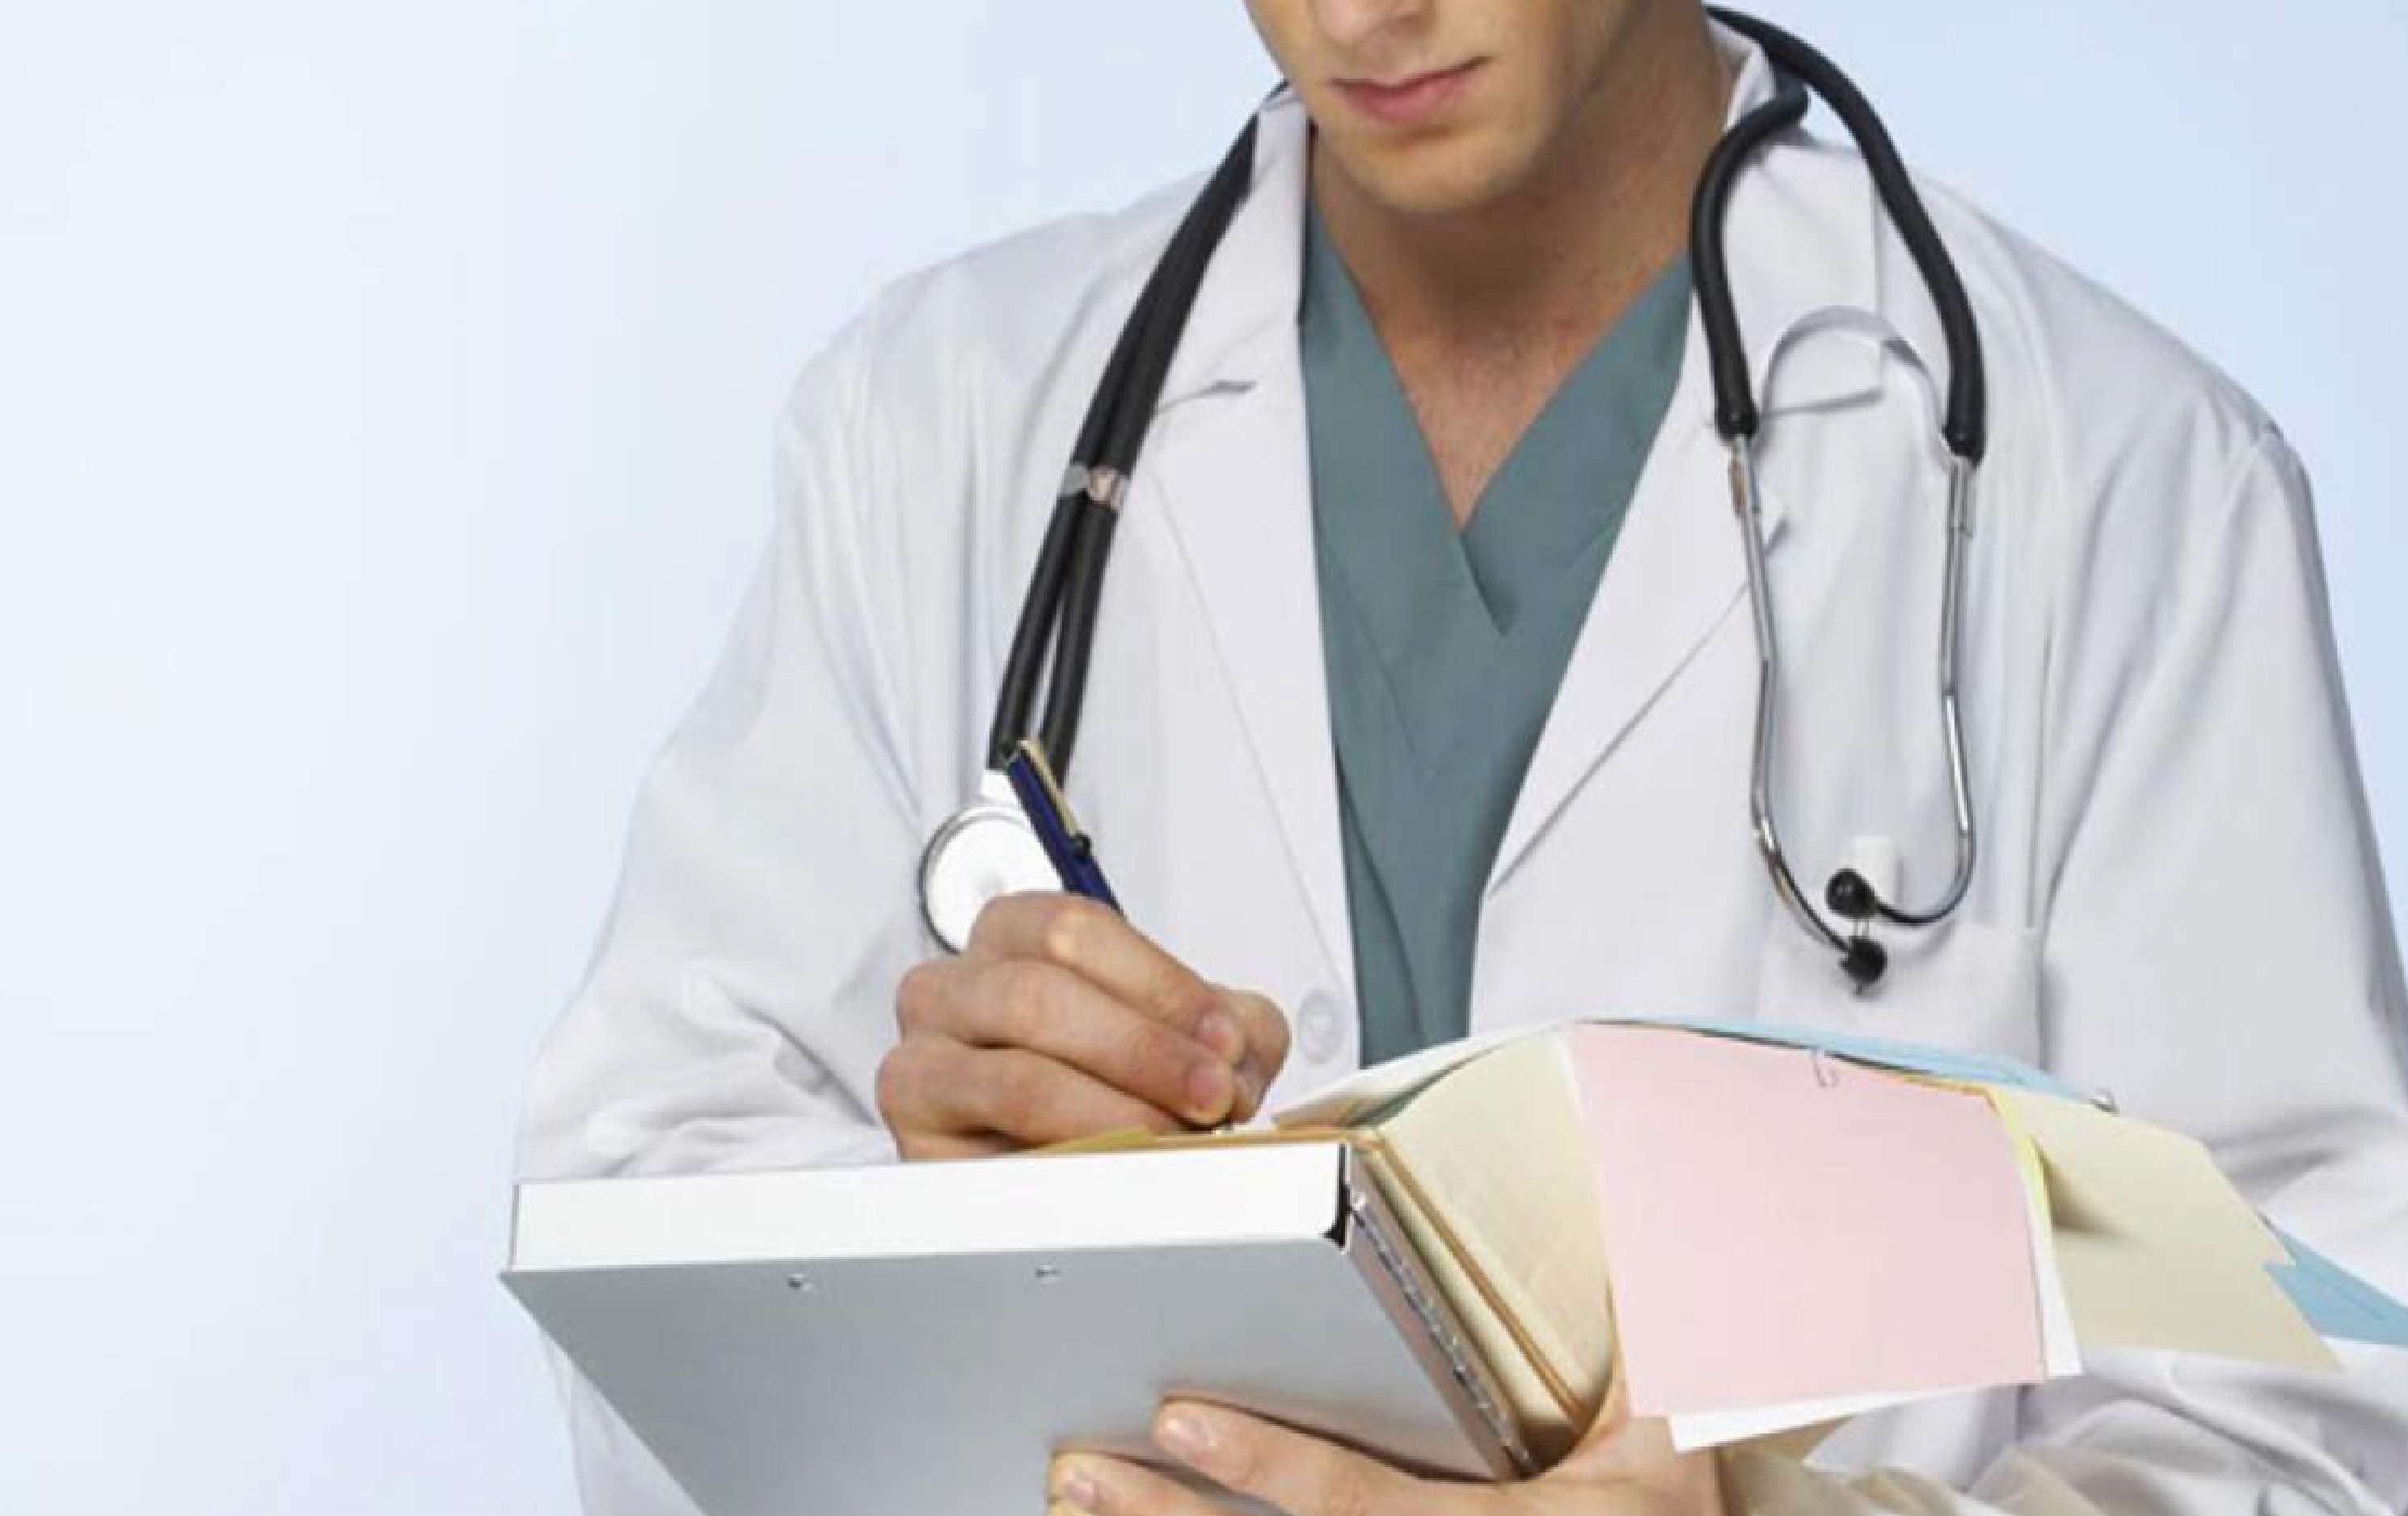 Decoding Doctor Dreams: Essential Qualities for Thriving in Indian Medical Schools